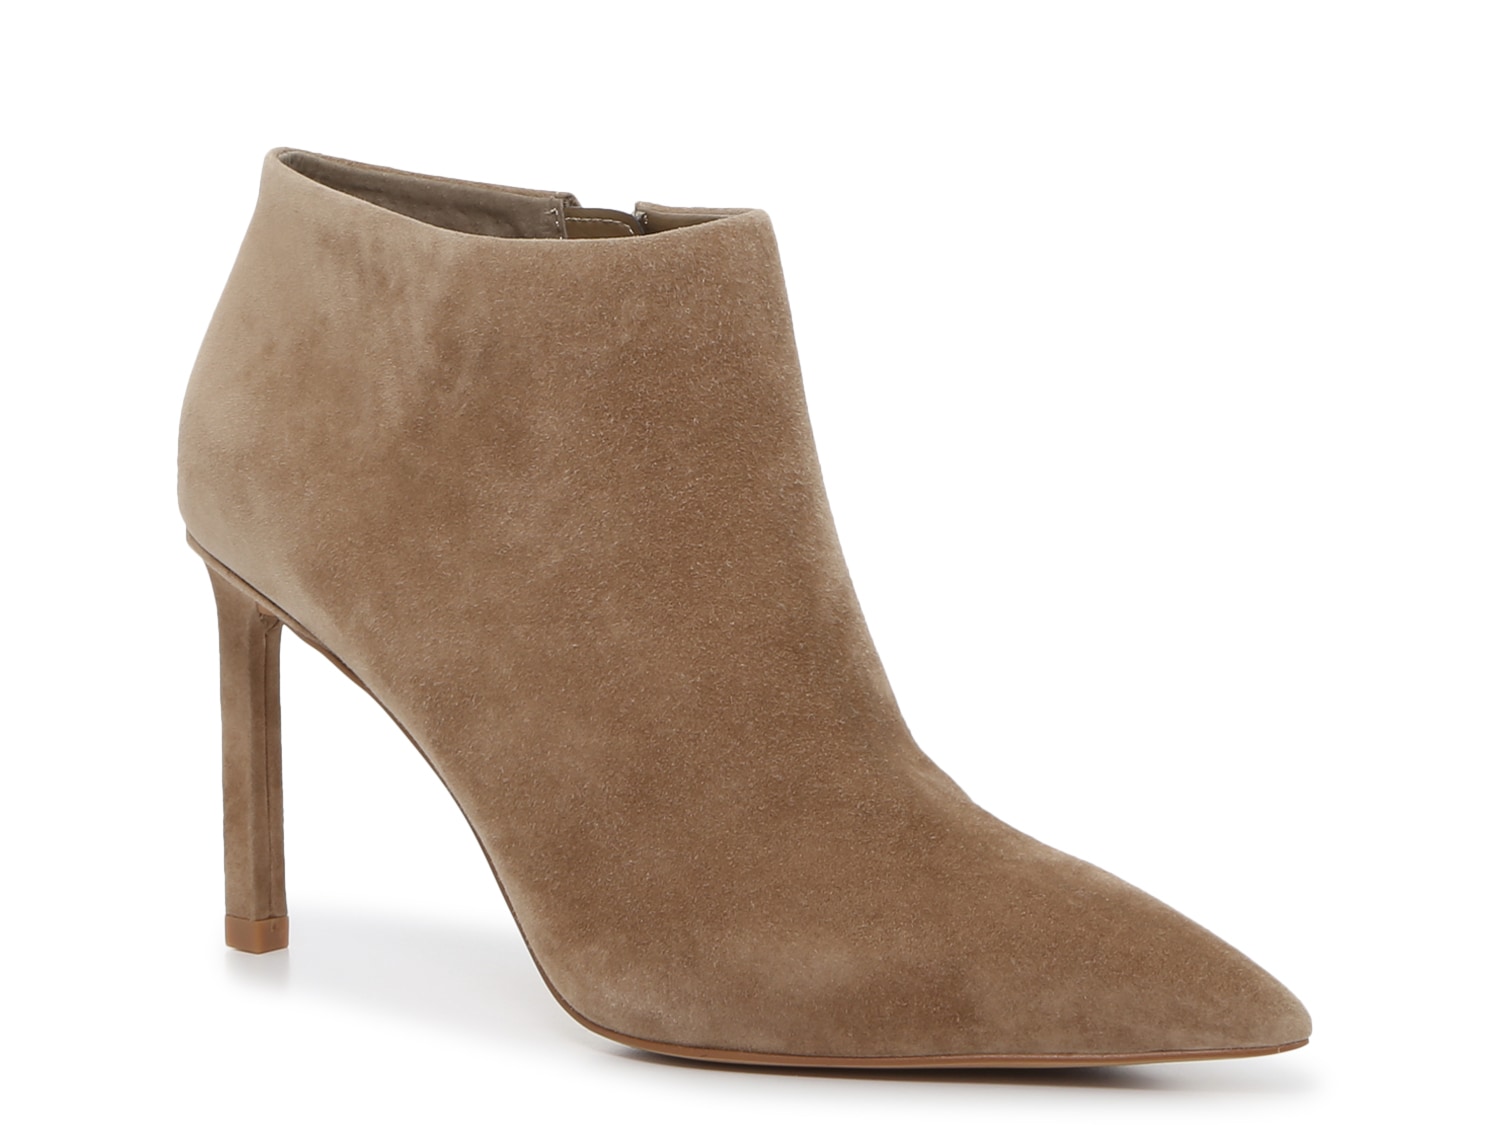 Vince Camuto Saston Bootie - Free Shipping